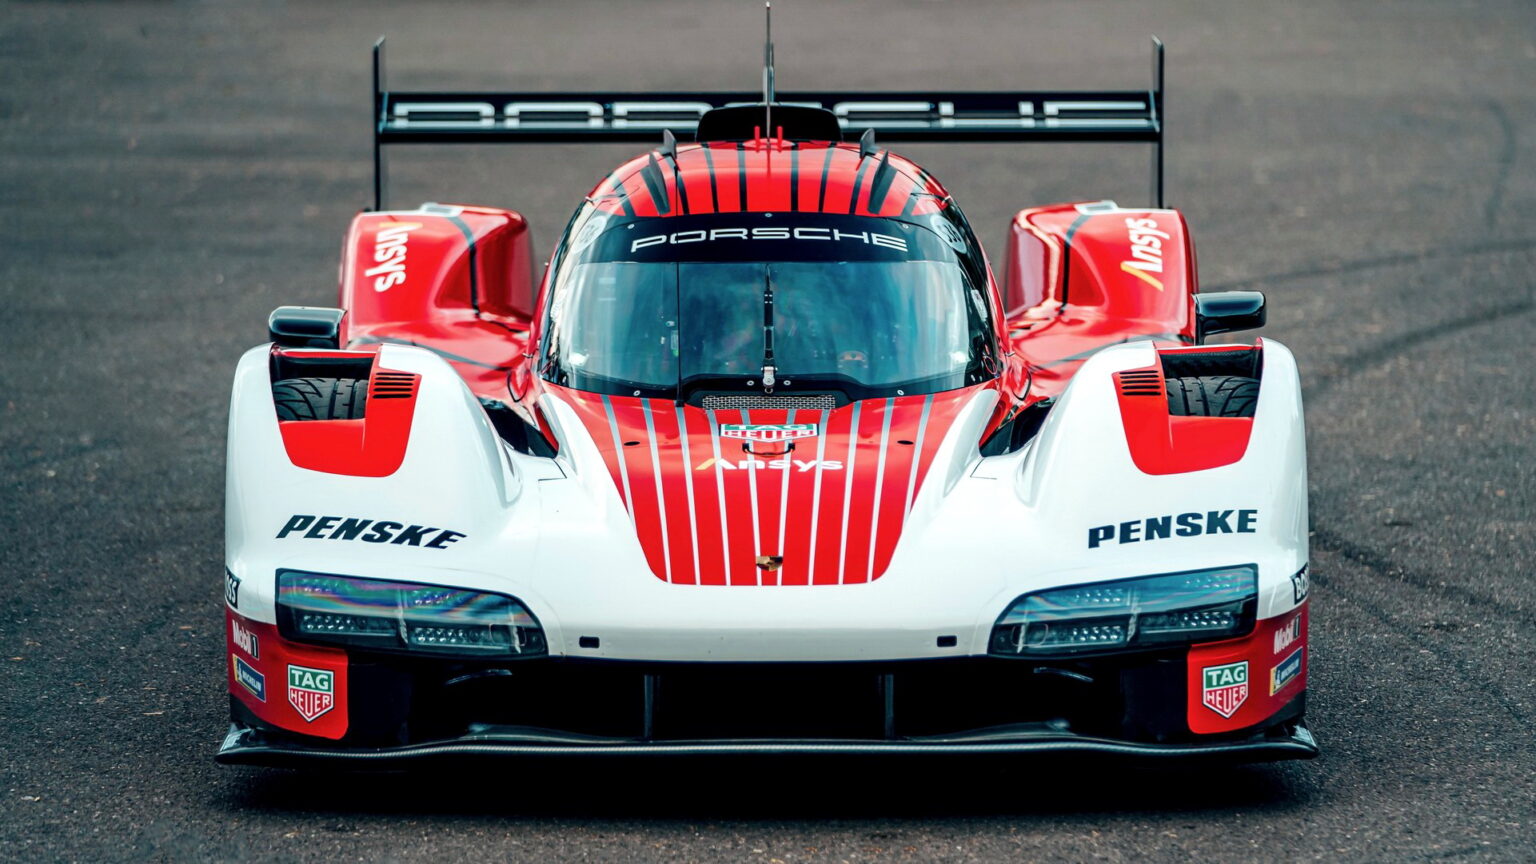 New Porsche 963 Is A 670 HP GTP Hypercar That Will Race At Daytona And